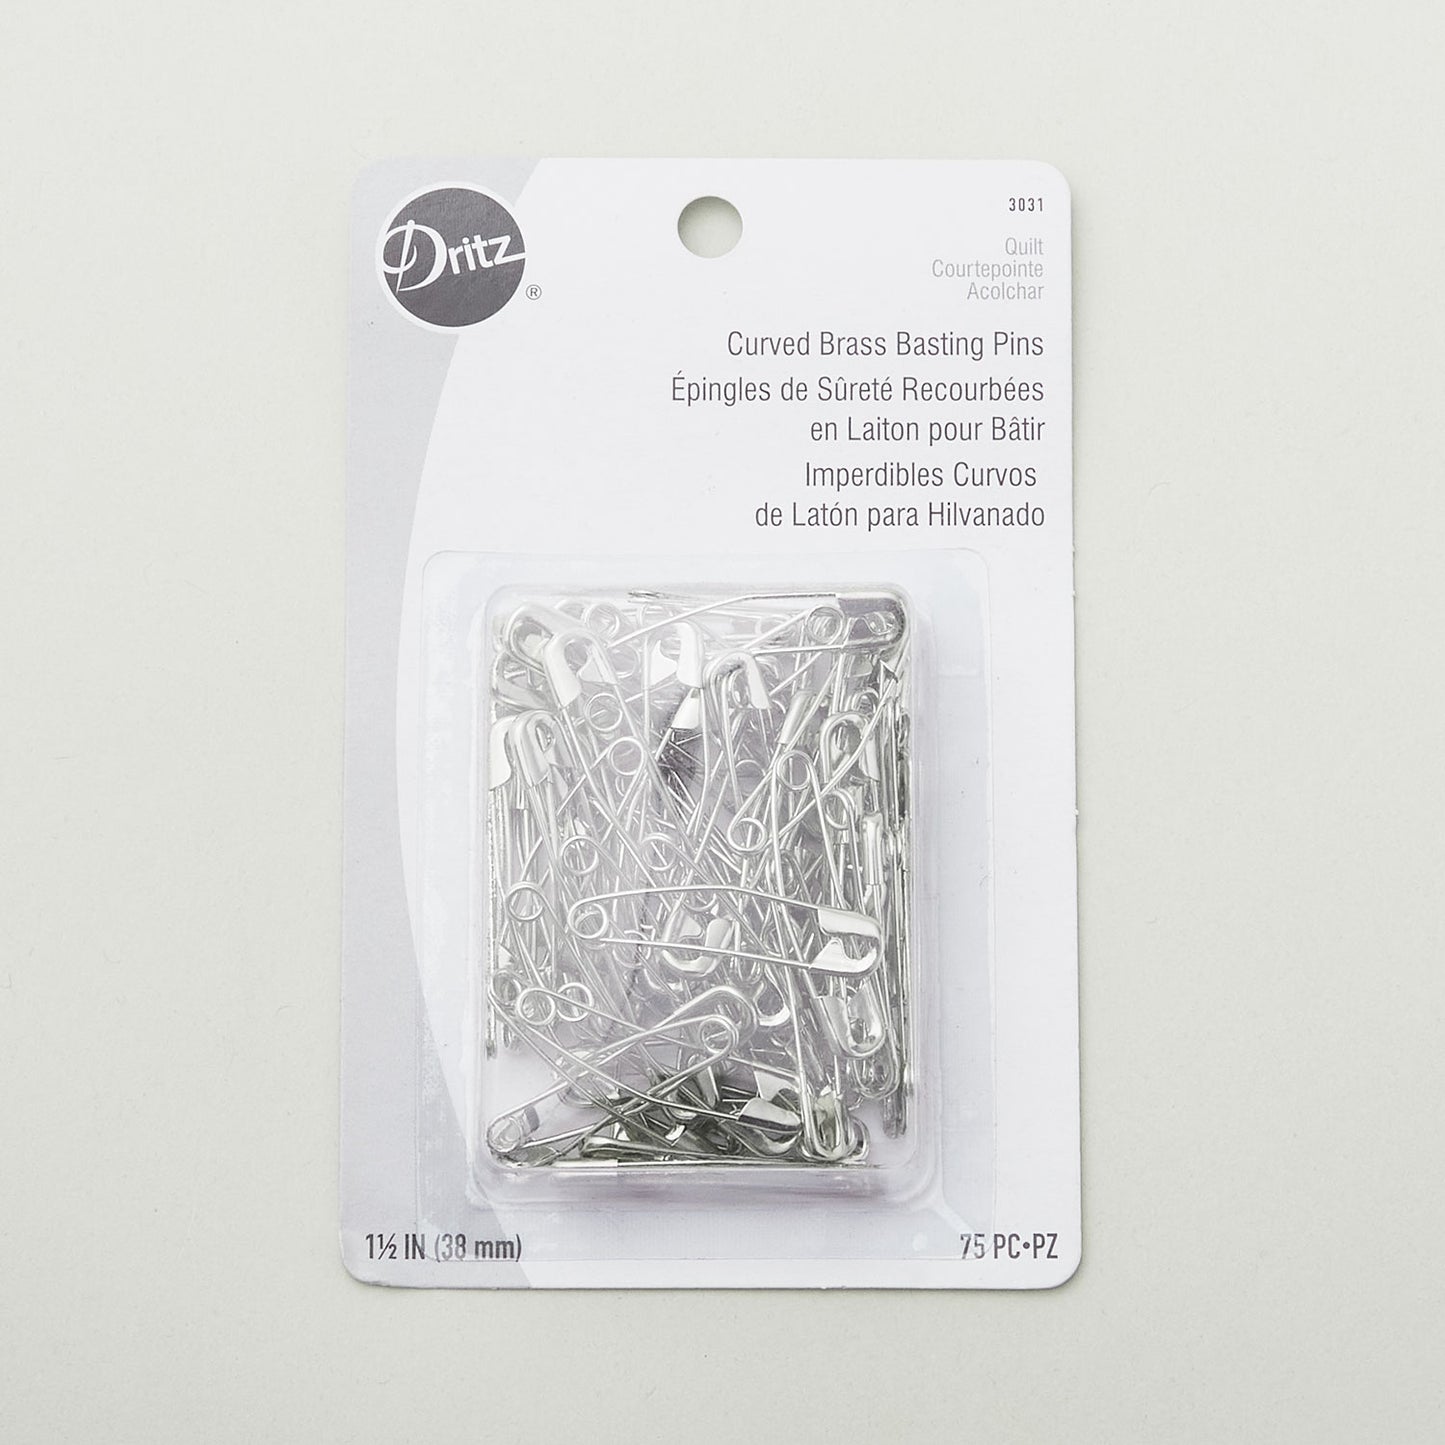 Dritz Curved Basting Pins - Size 2 Alternative View #2